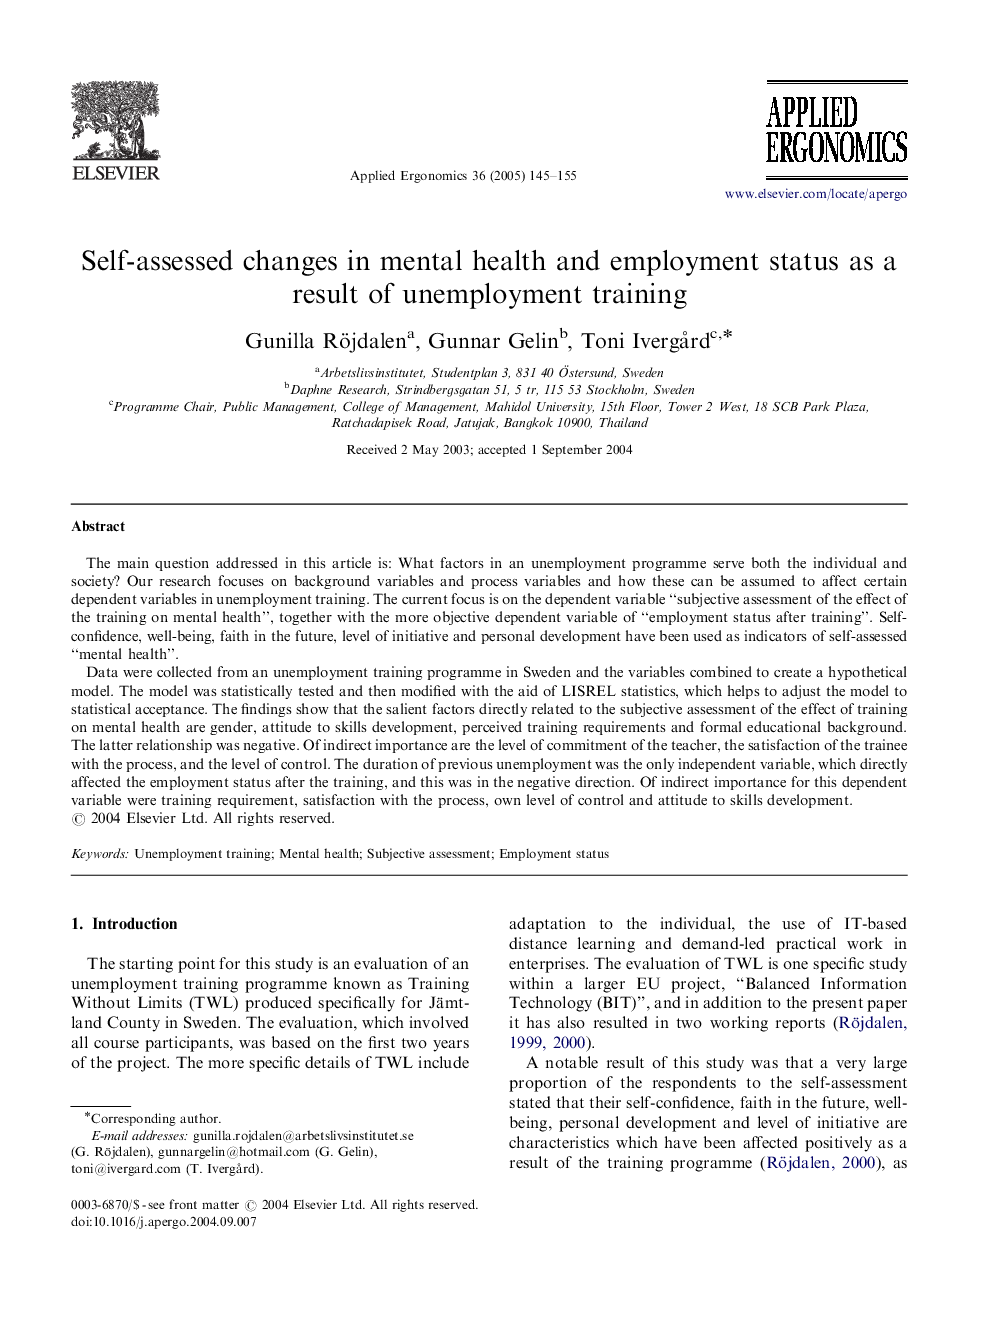 Self-assessed changes in mental health and employment status as a result of unemployment training